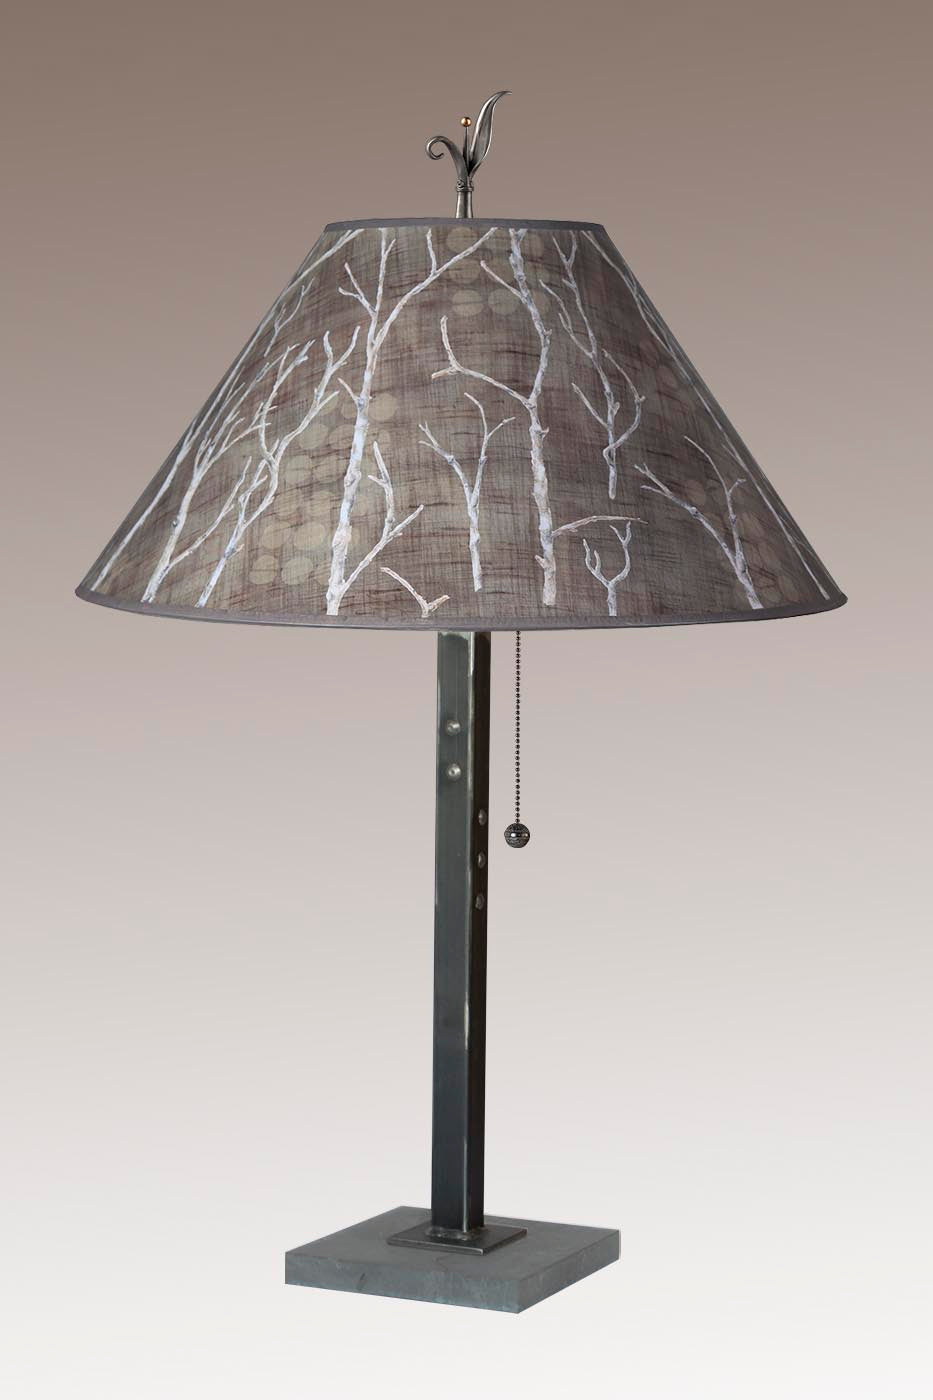 Steel Table Lamp with Large Conical Shade in Twigs